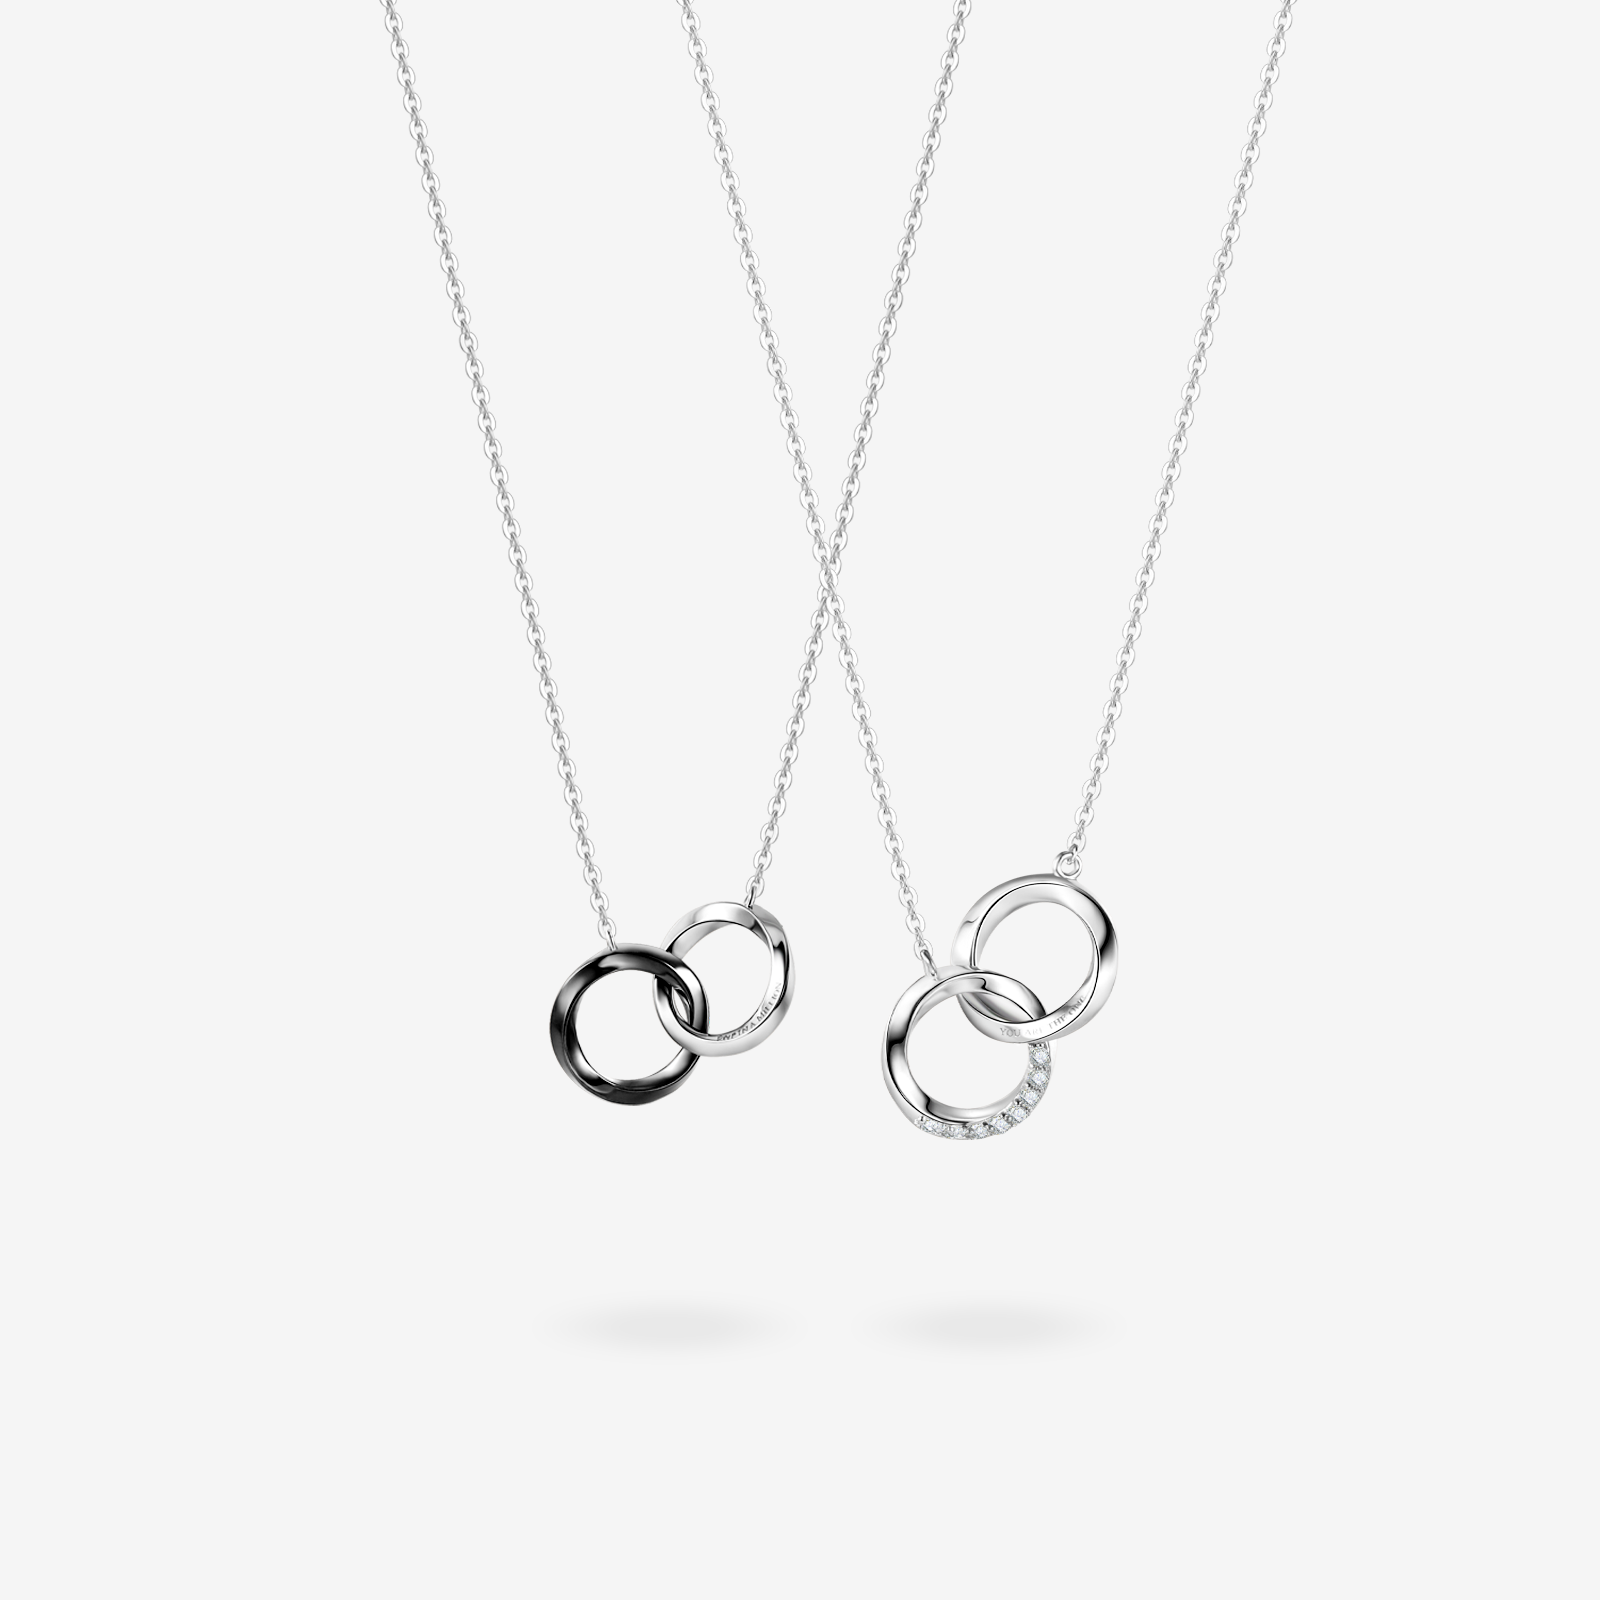 FANCIME "Together" Interlocking Ring Sterling Silver Necklace Main